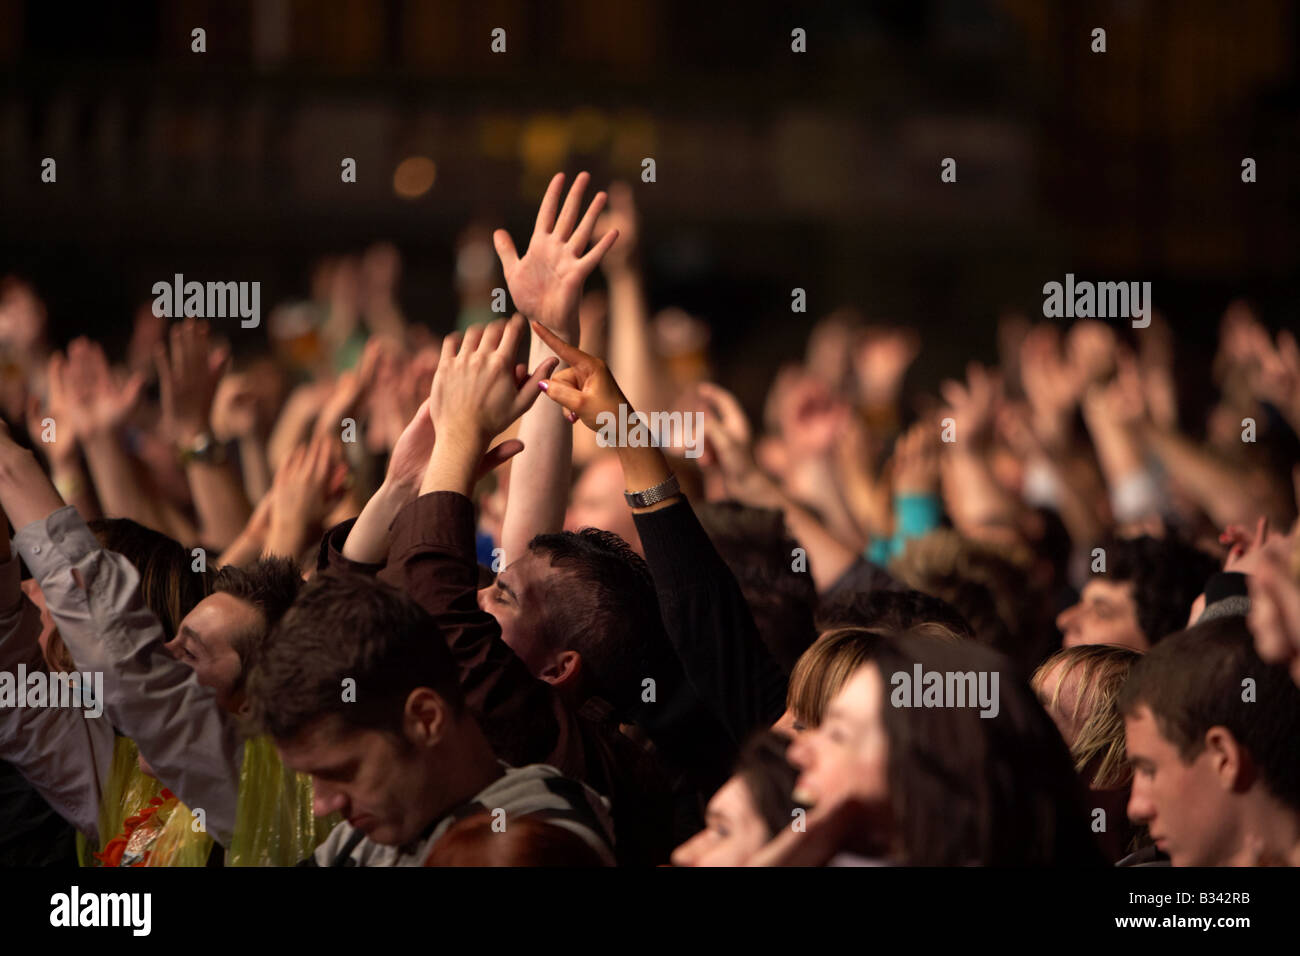 hands waving and pointing in a crowd of people during a nighttime concert in Belfast Stock Photo